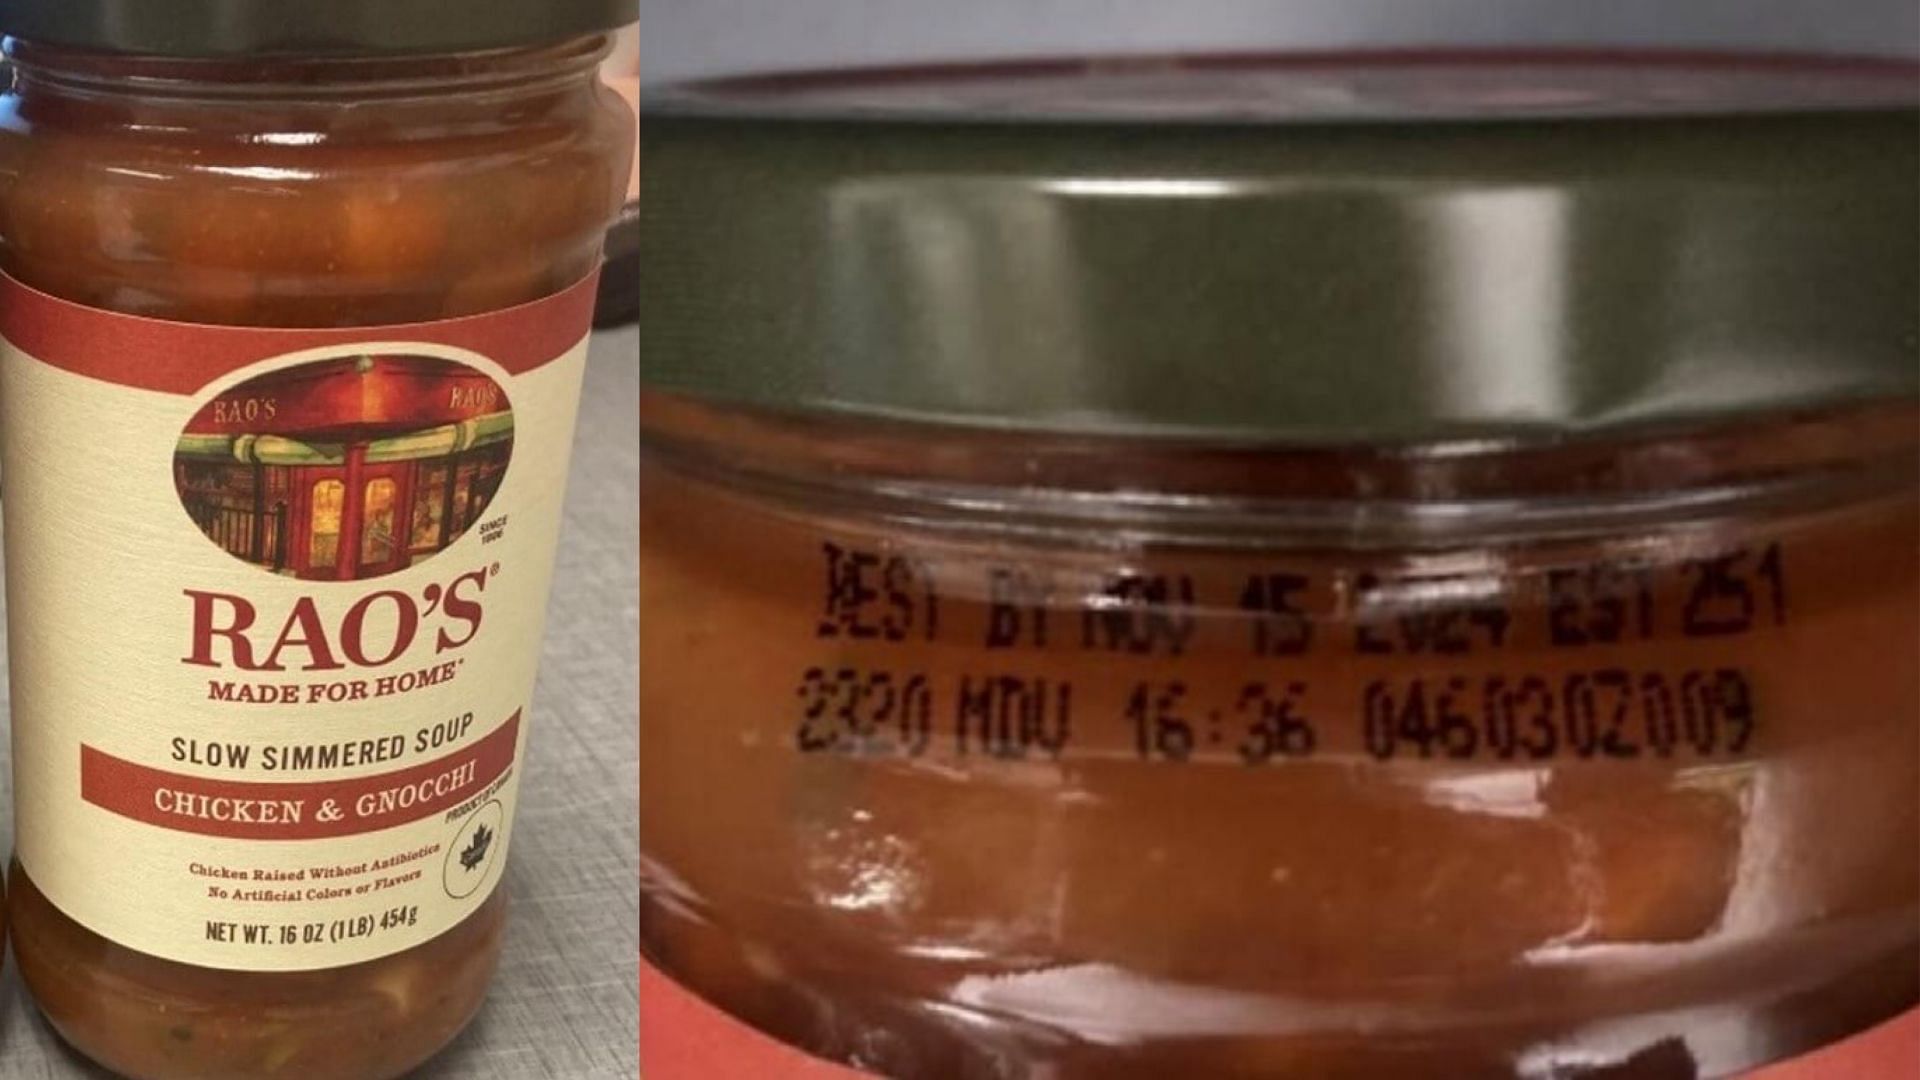 Rao's Soup Recalled Because of a Label Mix Up